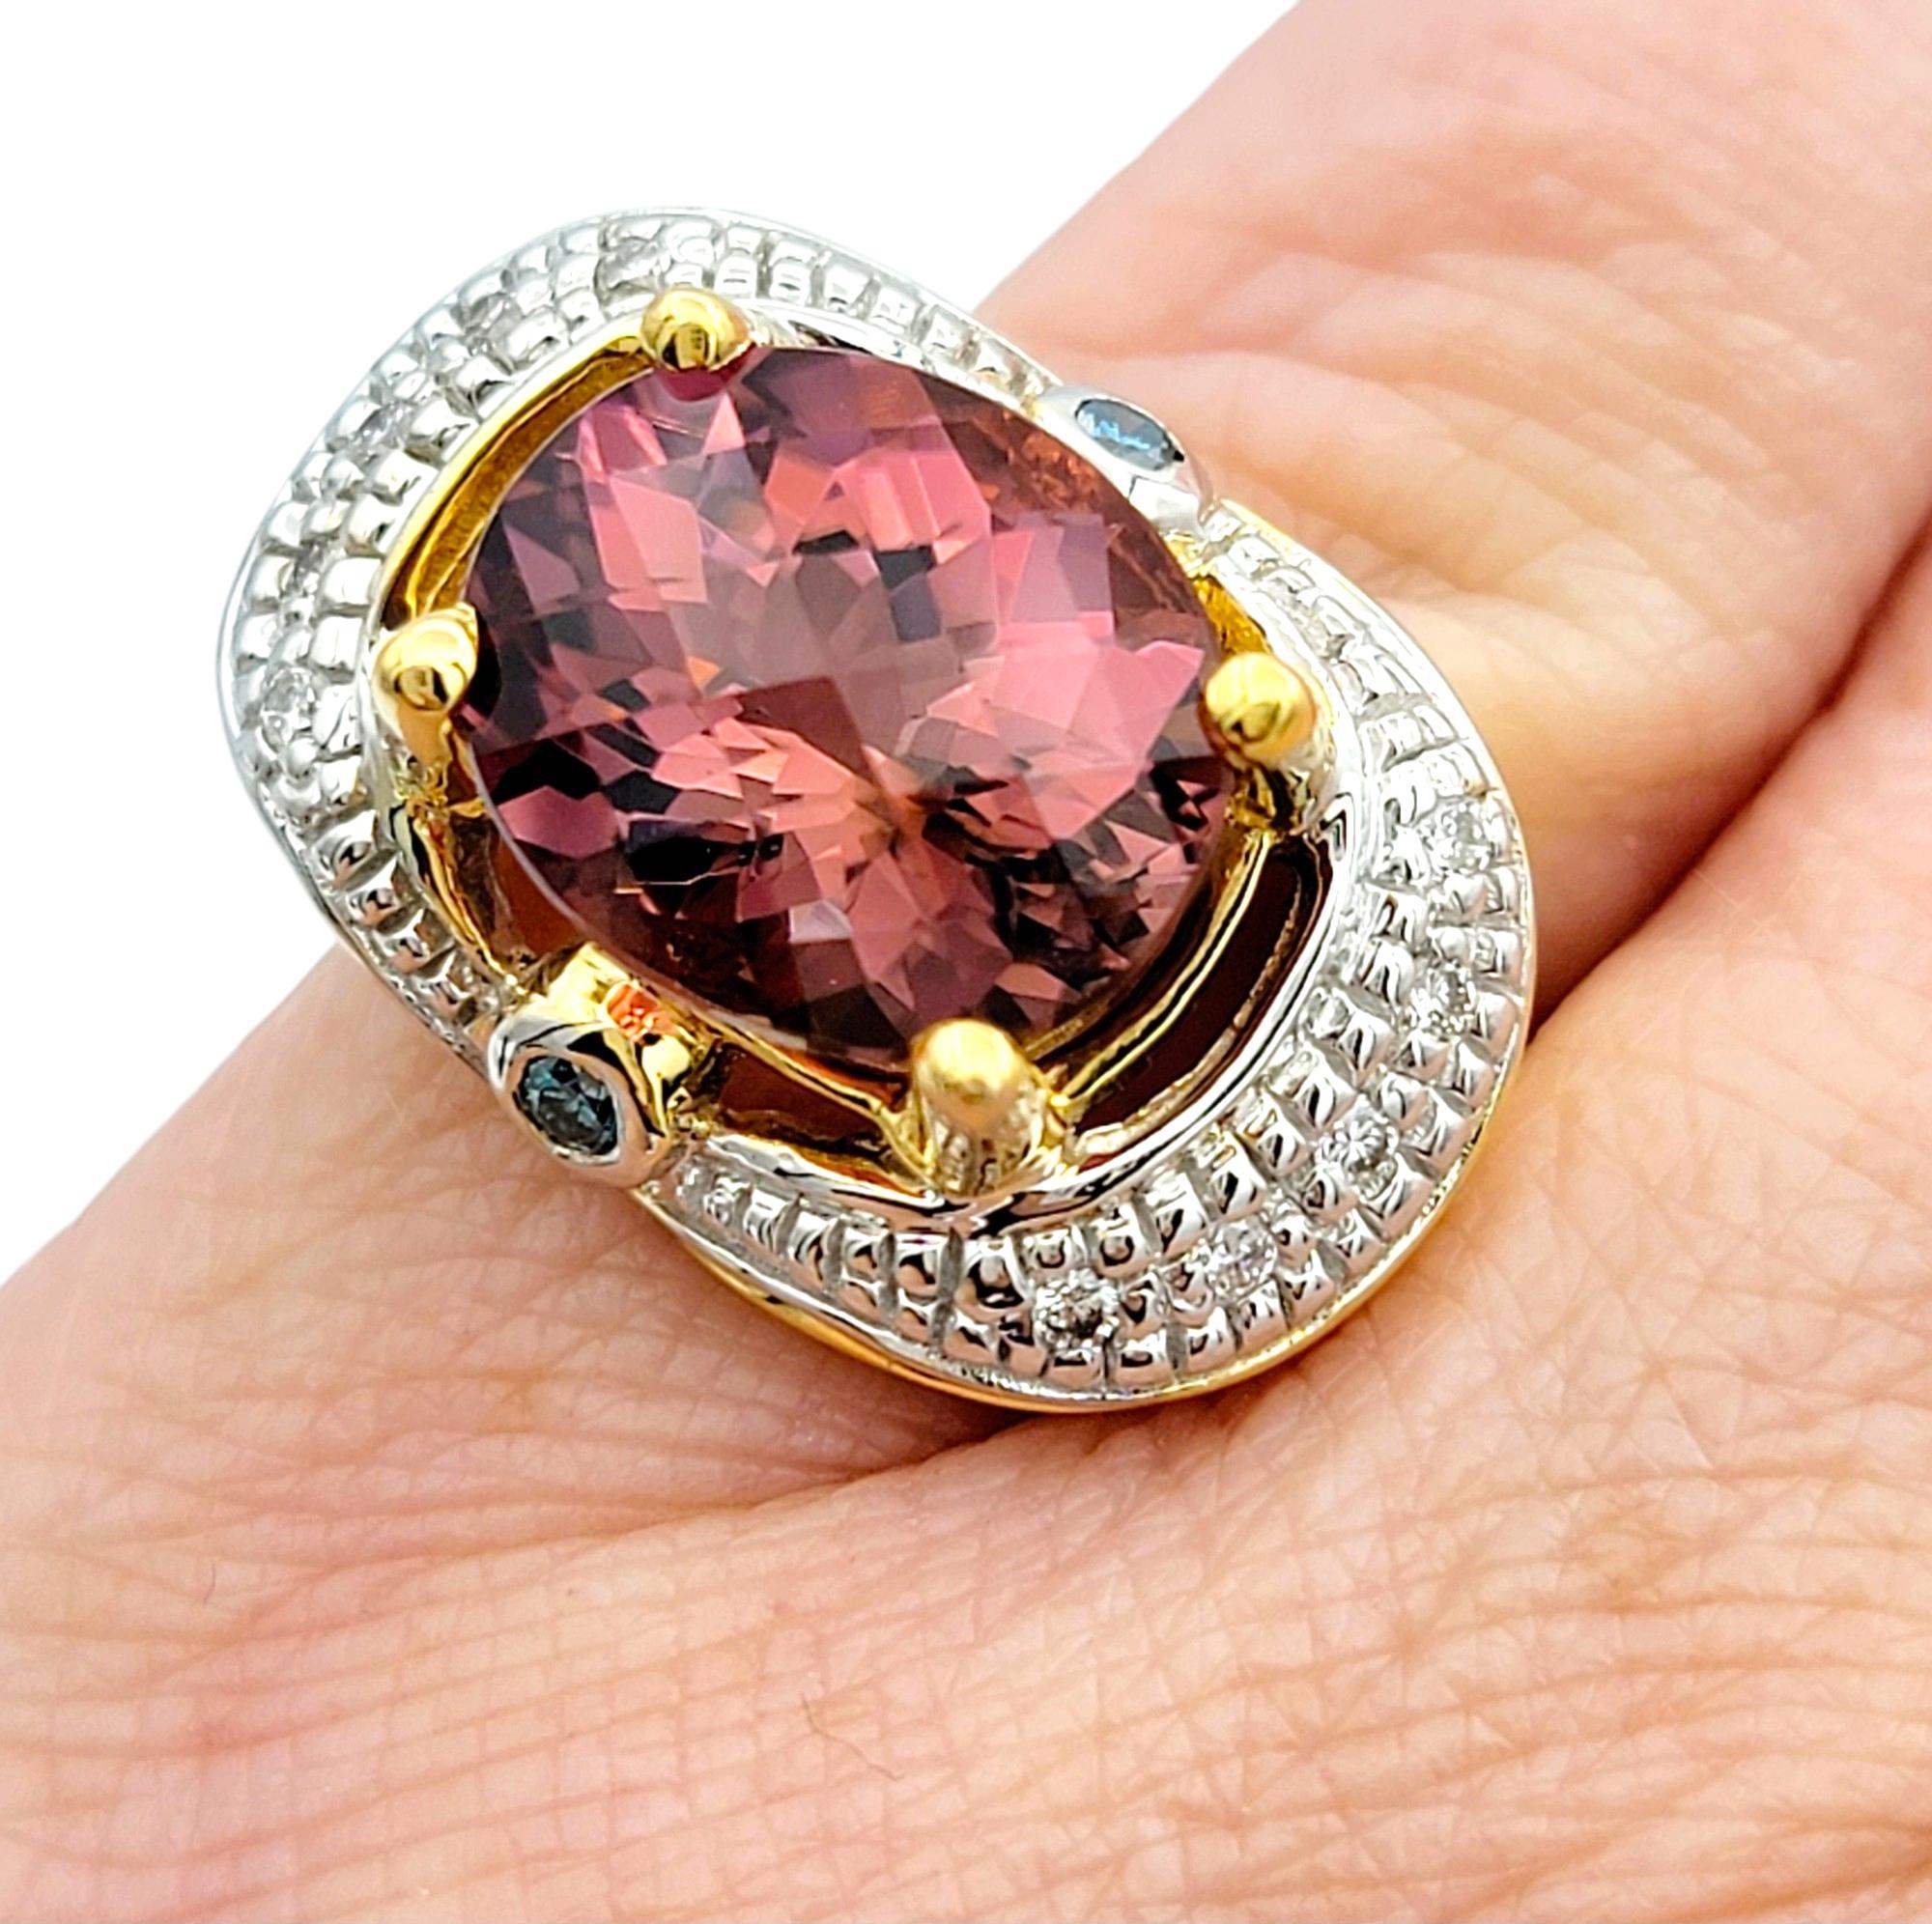 Oval Pink Tourmaline and Diamond Halo Ring Set in 14 Karat White and Yellow Gold For Sale 3